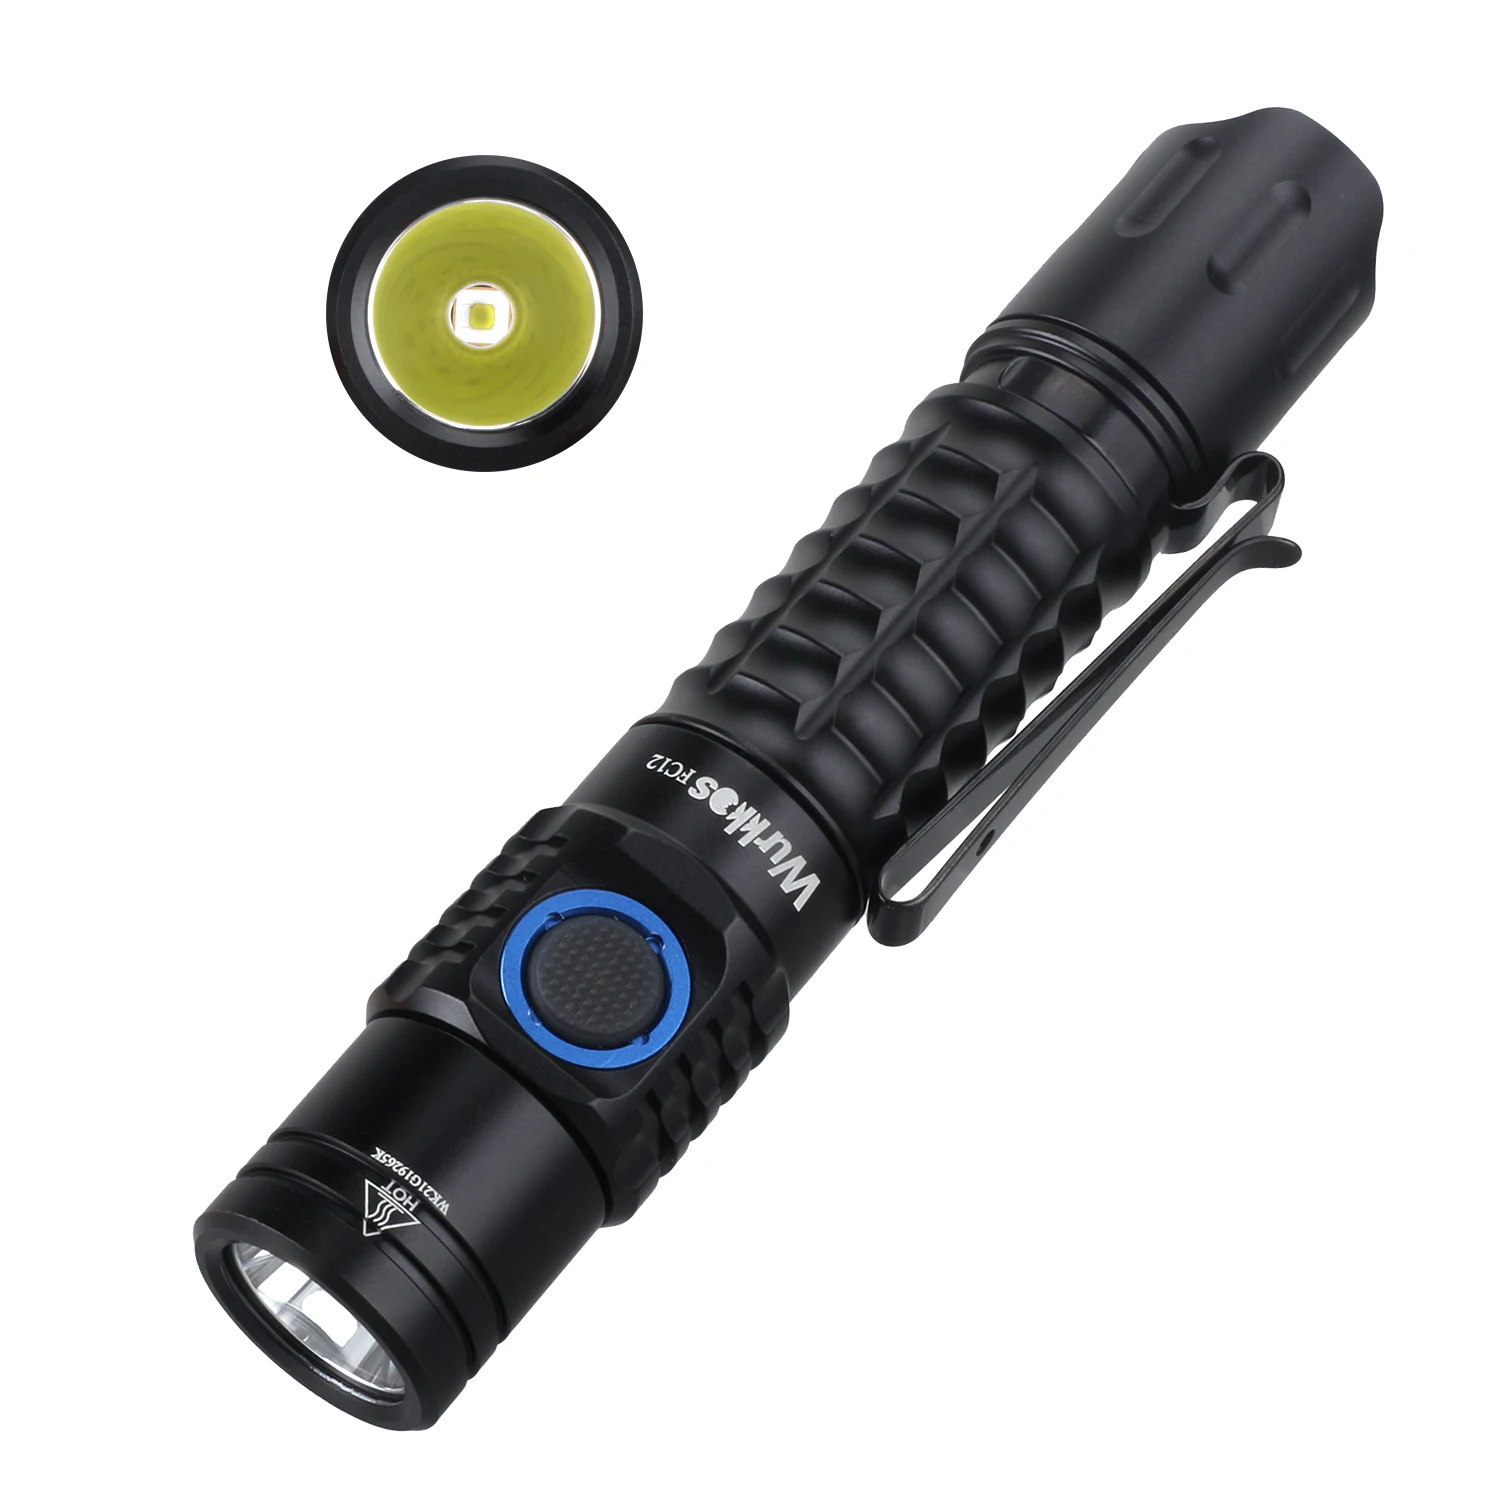 

Wurkkos FC12 Rechargeable Torches Tactical Flashlights LED 18650 SFT40 2000lm ATR Power Indicator USB-C IPX8 EDC Camp Lighting